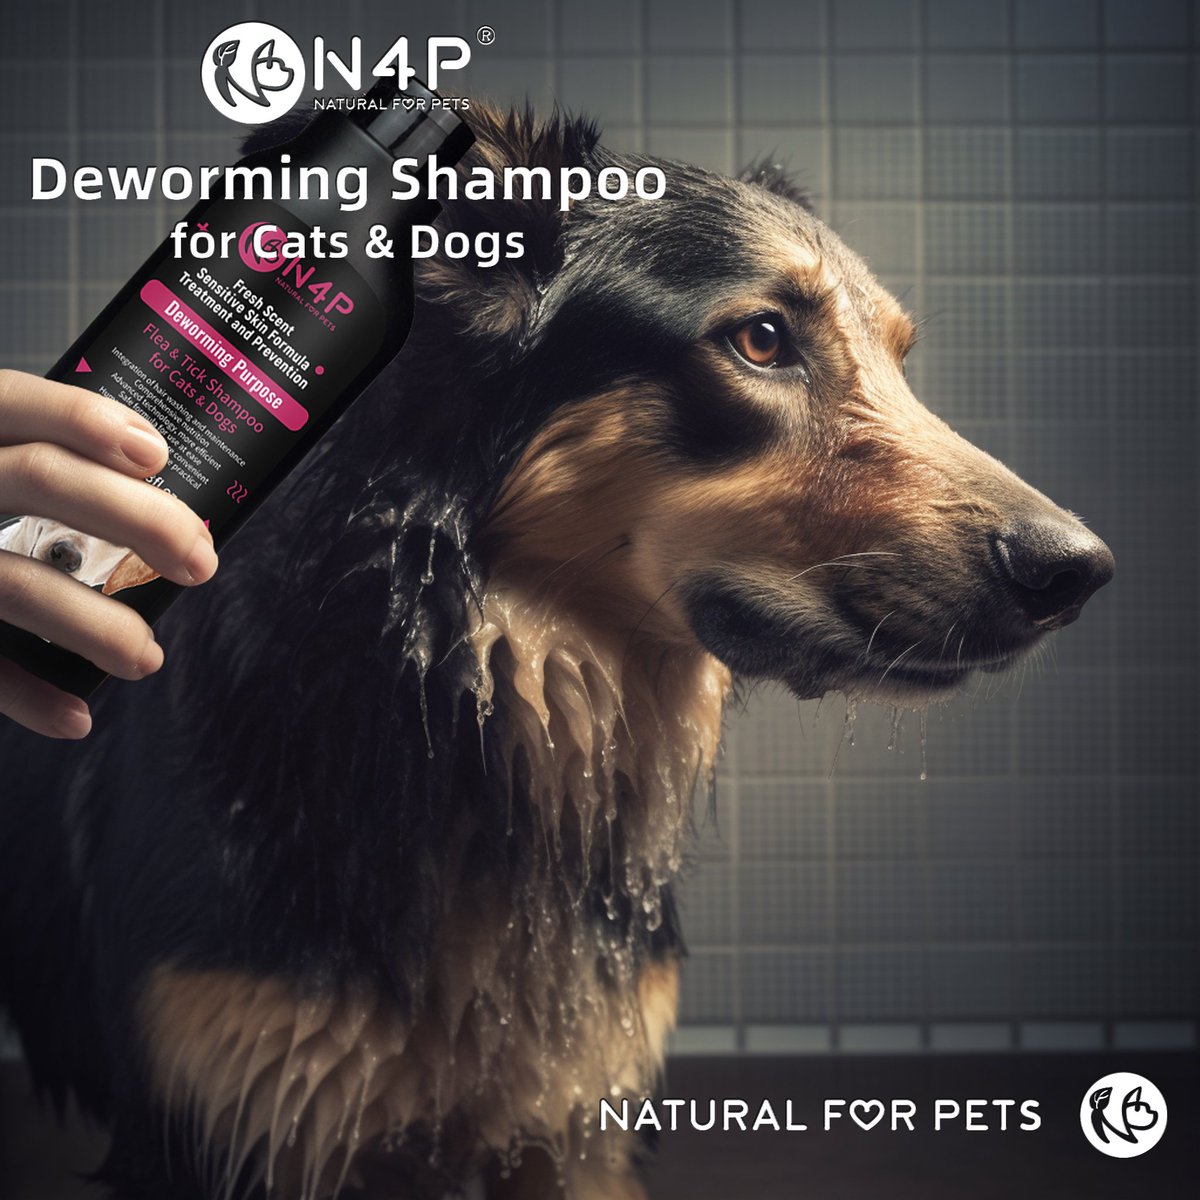 Bath time is fun again with N4P Shampoo!  #VetApproved #PetGrooming #PetWellness
Gentle, natural formula soothes skin while keeping pups parasite-free. Over 10 years producing premium products. Made in our own factory for quality control. n4pets.com #PetRetailers